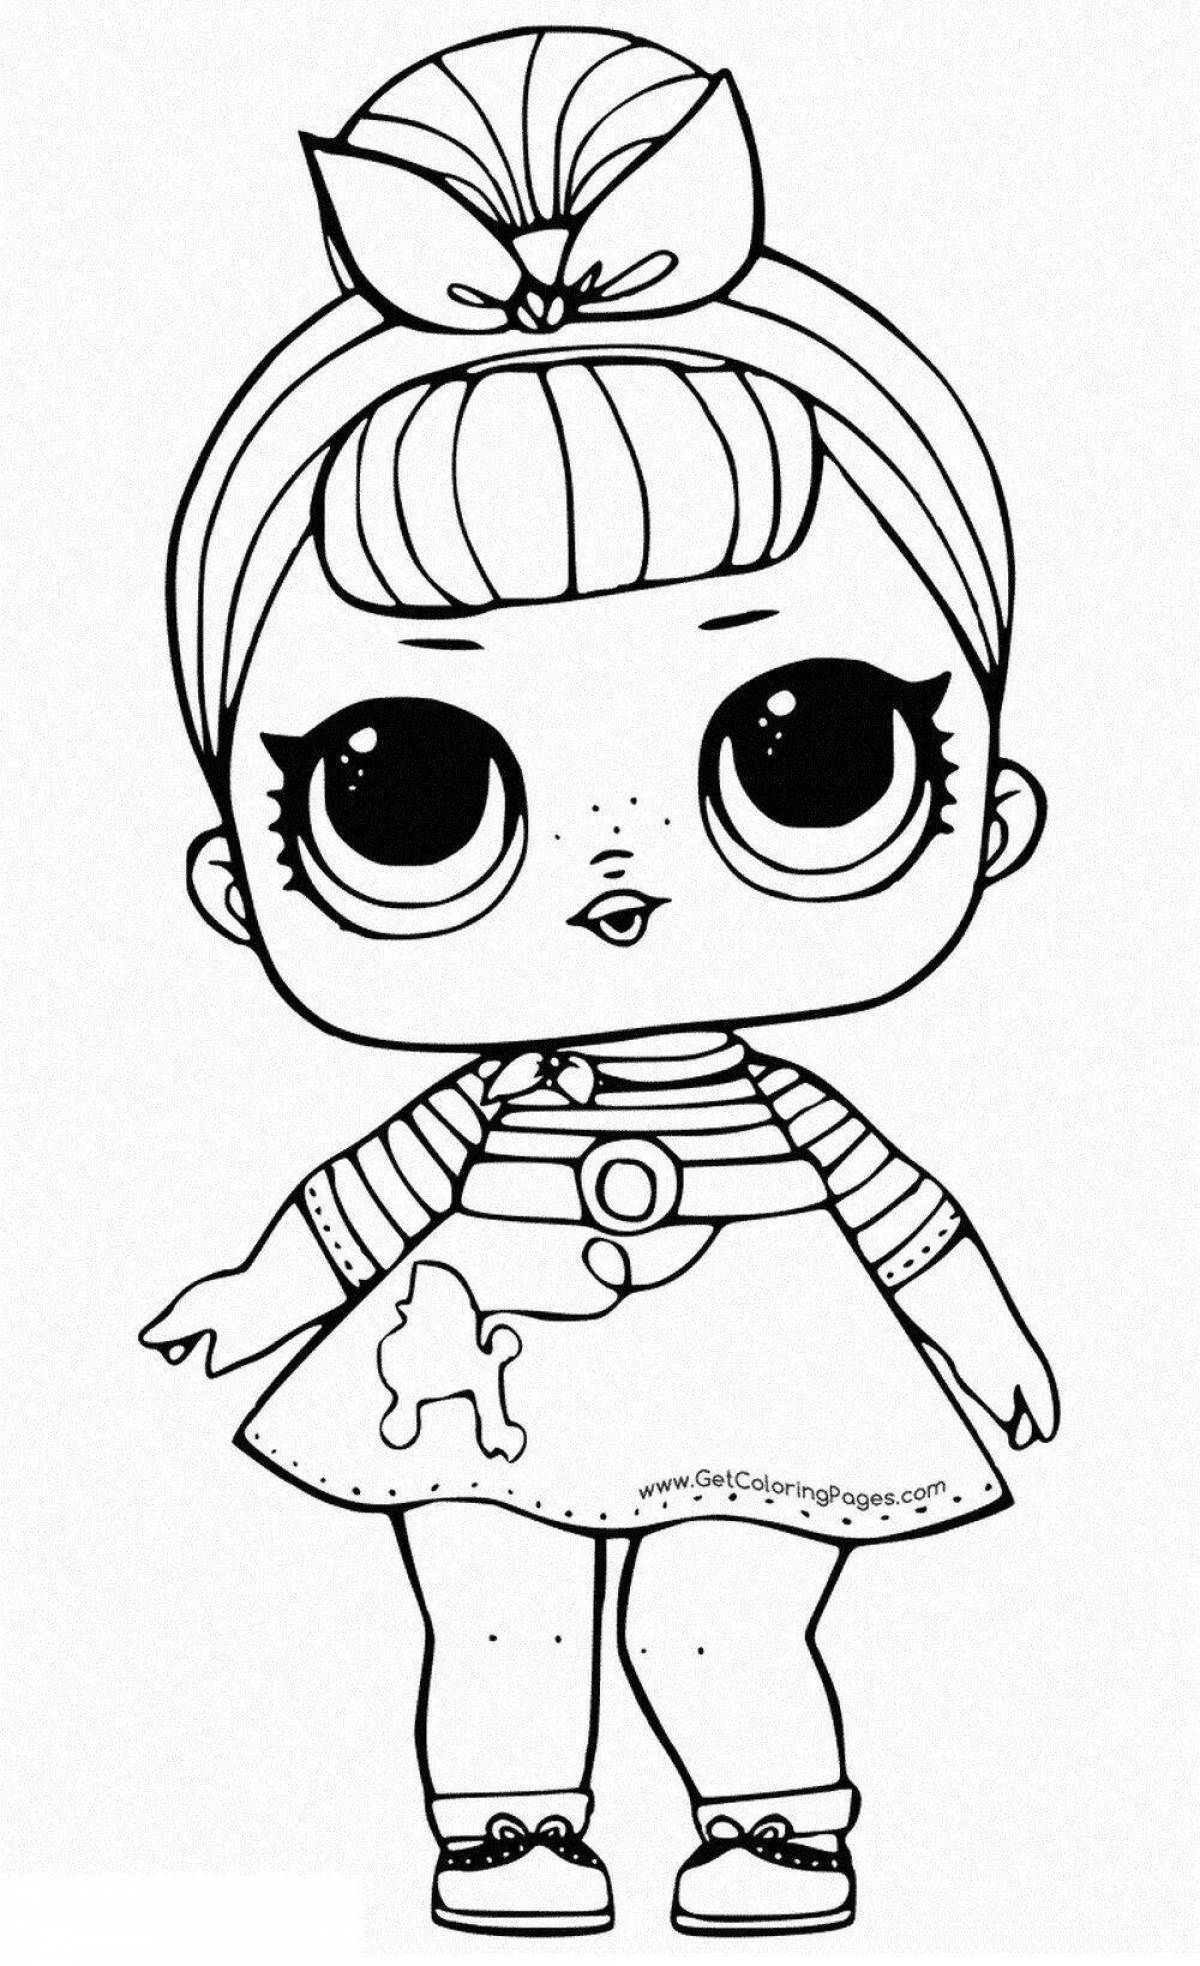 Colourful lol doll coloring book for kids